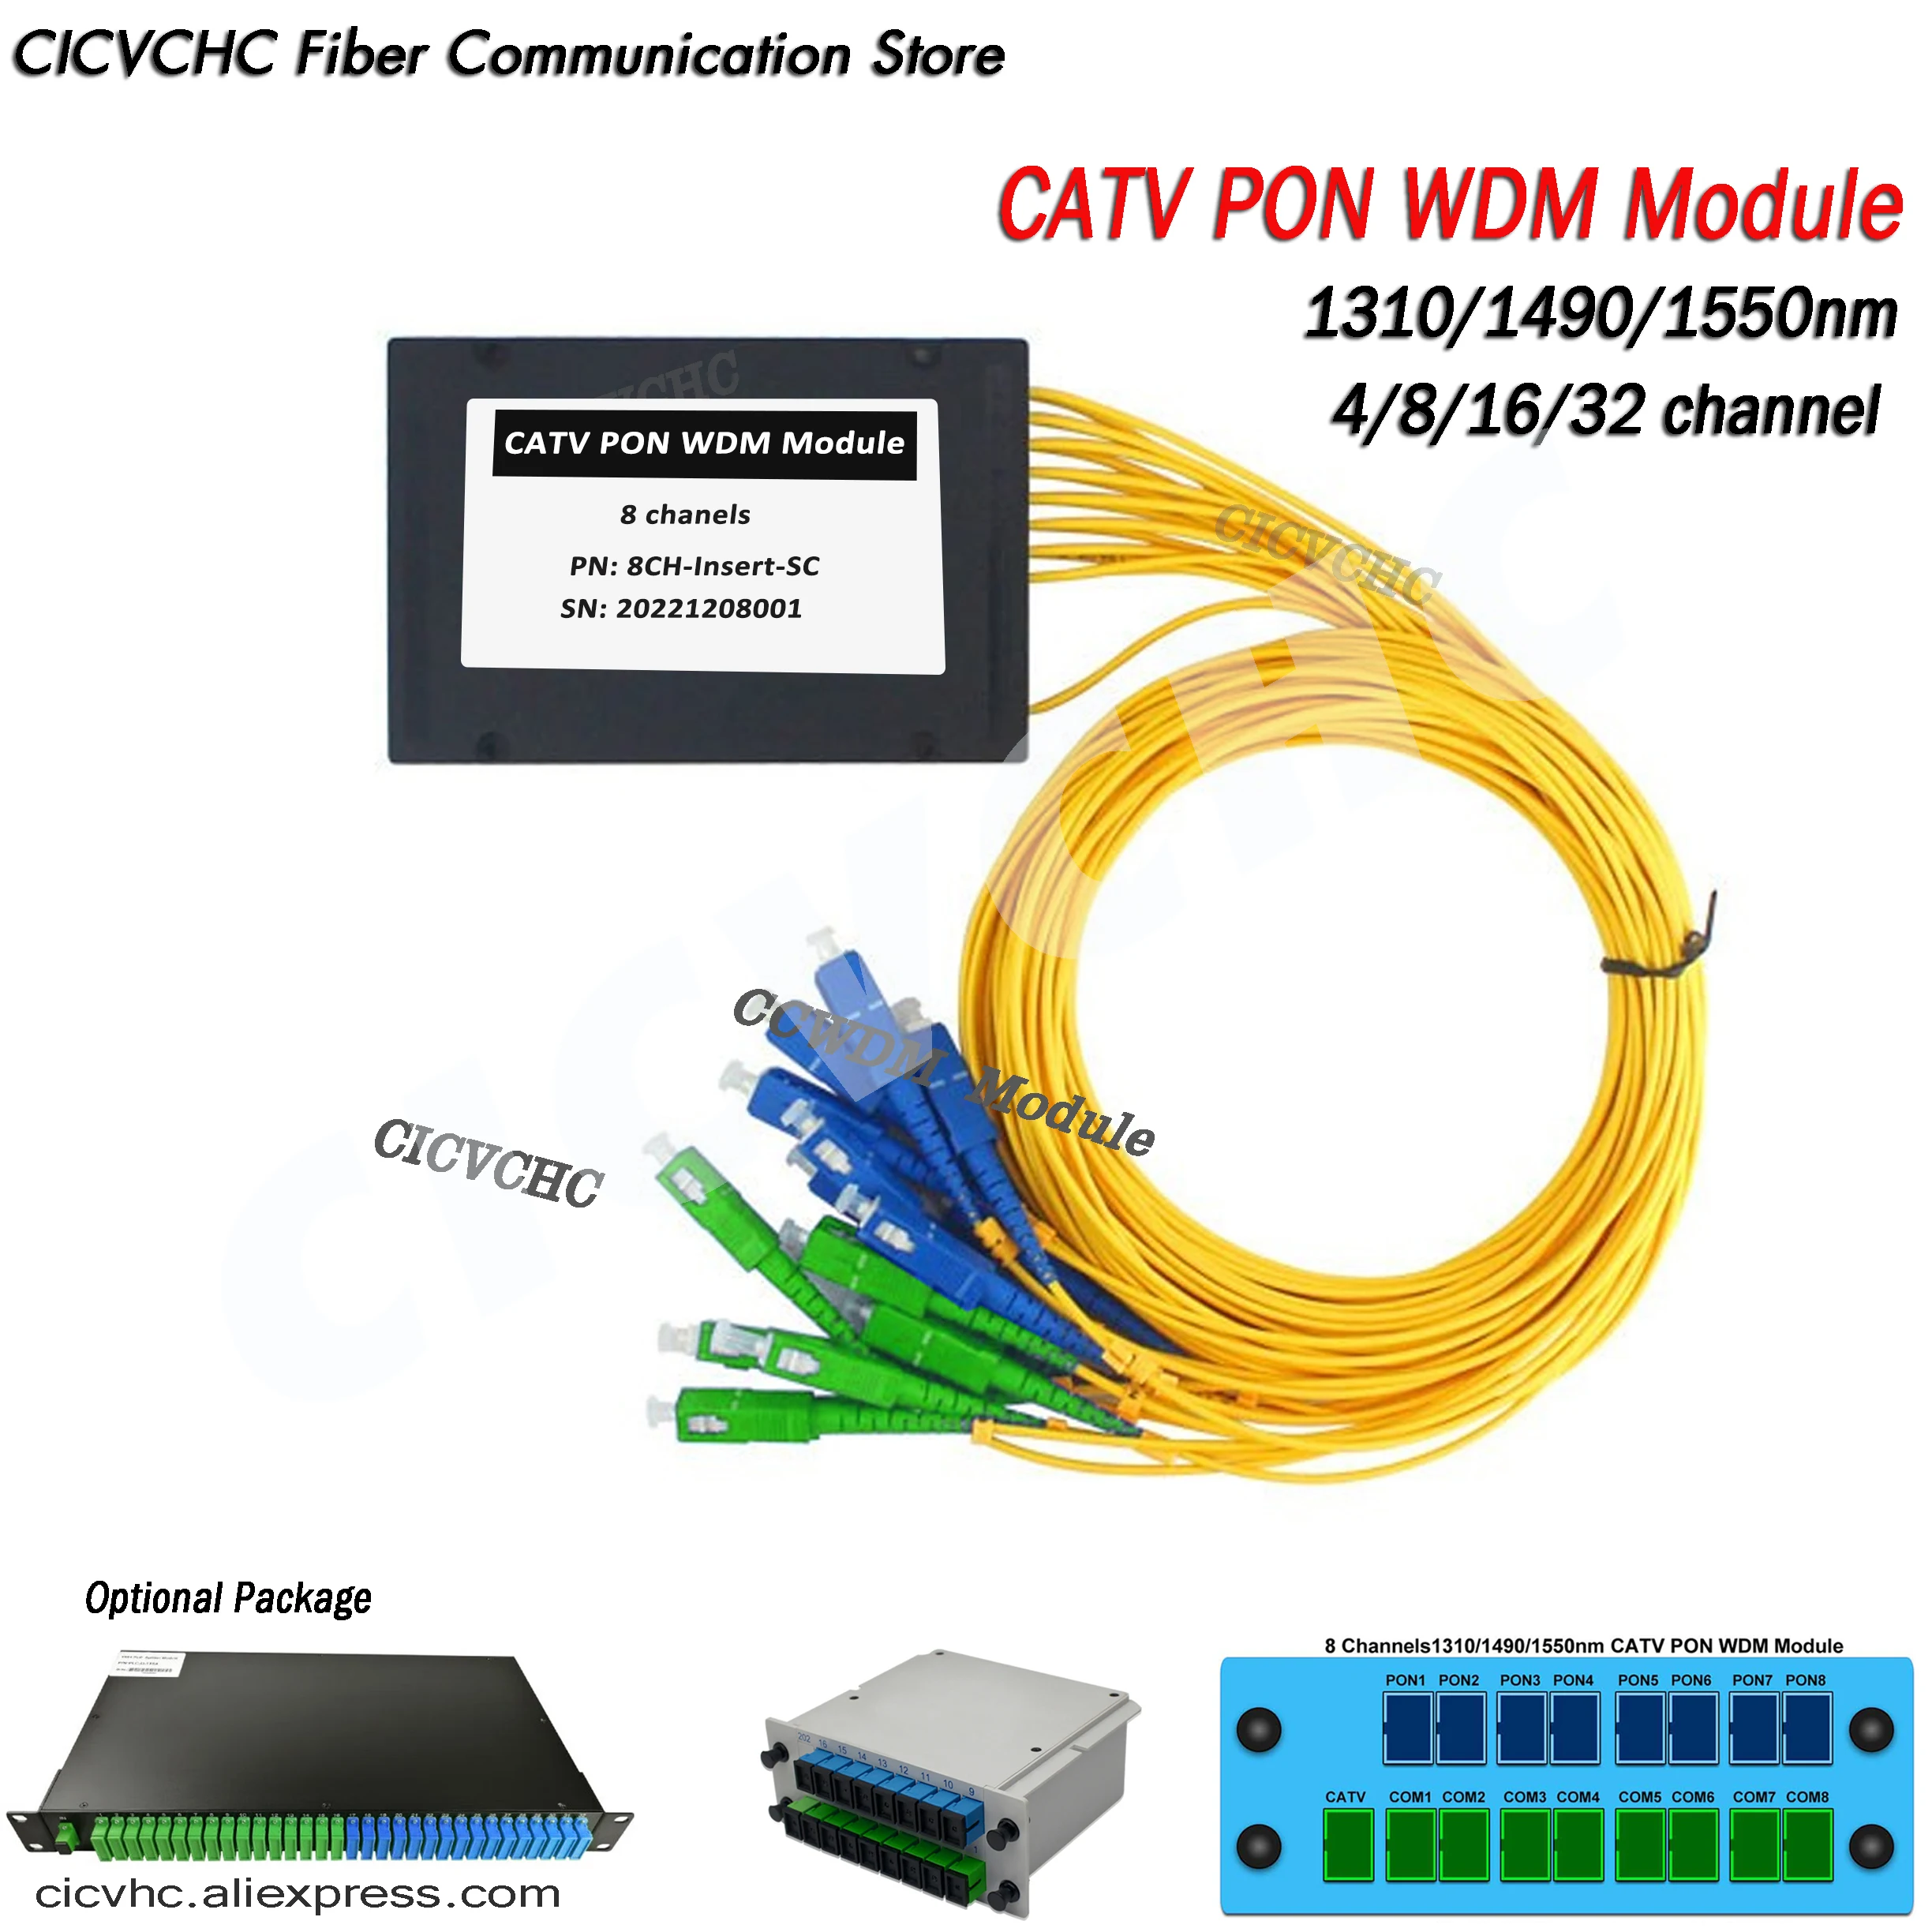 1310/1490/1550nm CATV PON WDM Module with 4, 8, 16, 32 Channels